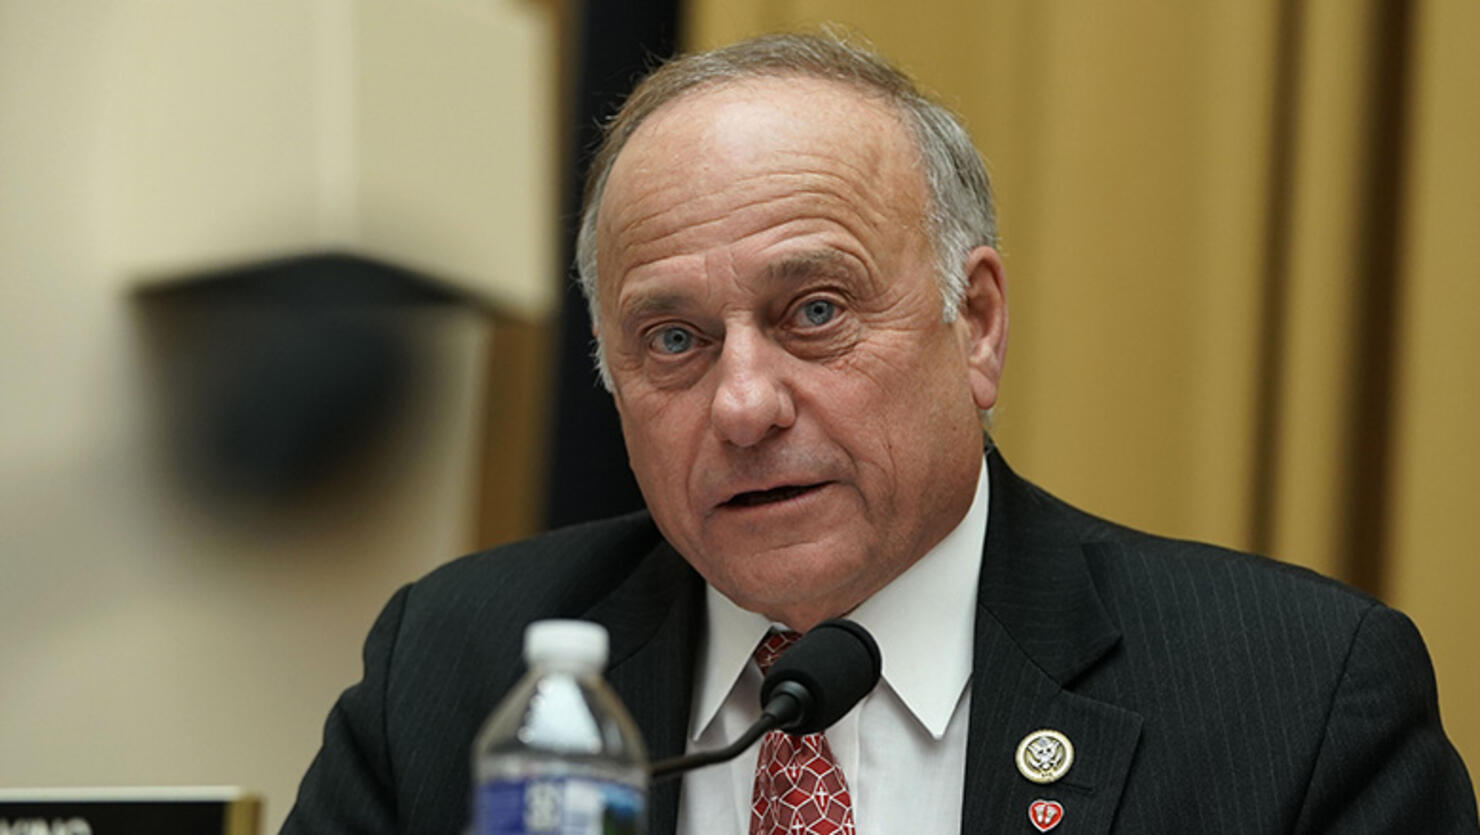 U.S. Rep. Steve King (R-IA) speaks during a hearing where Google CEO Sundar Pichai testifies before the House Judiciary Committee at the Rayburn House Office Building 